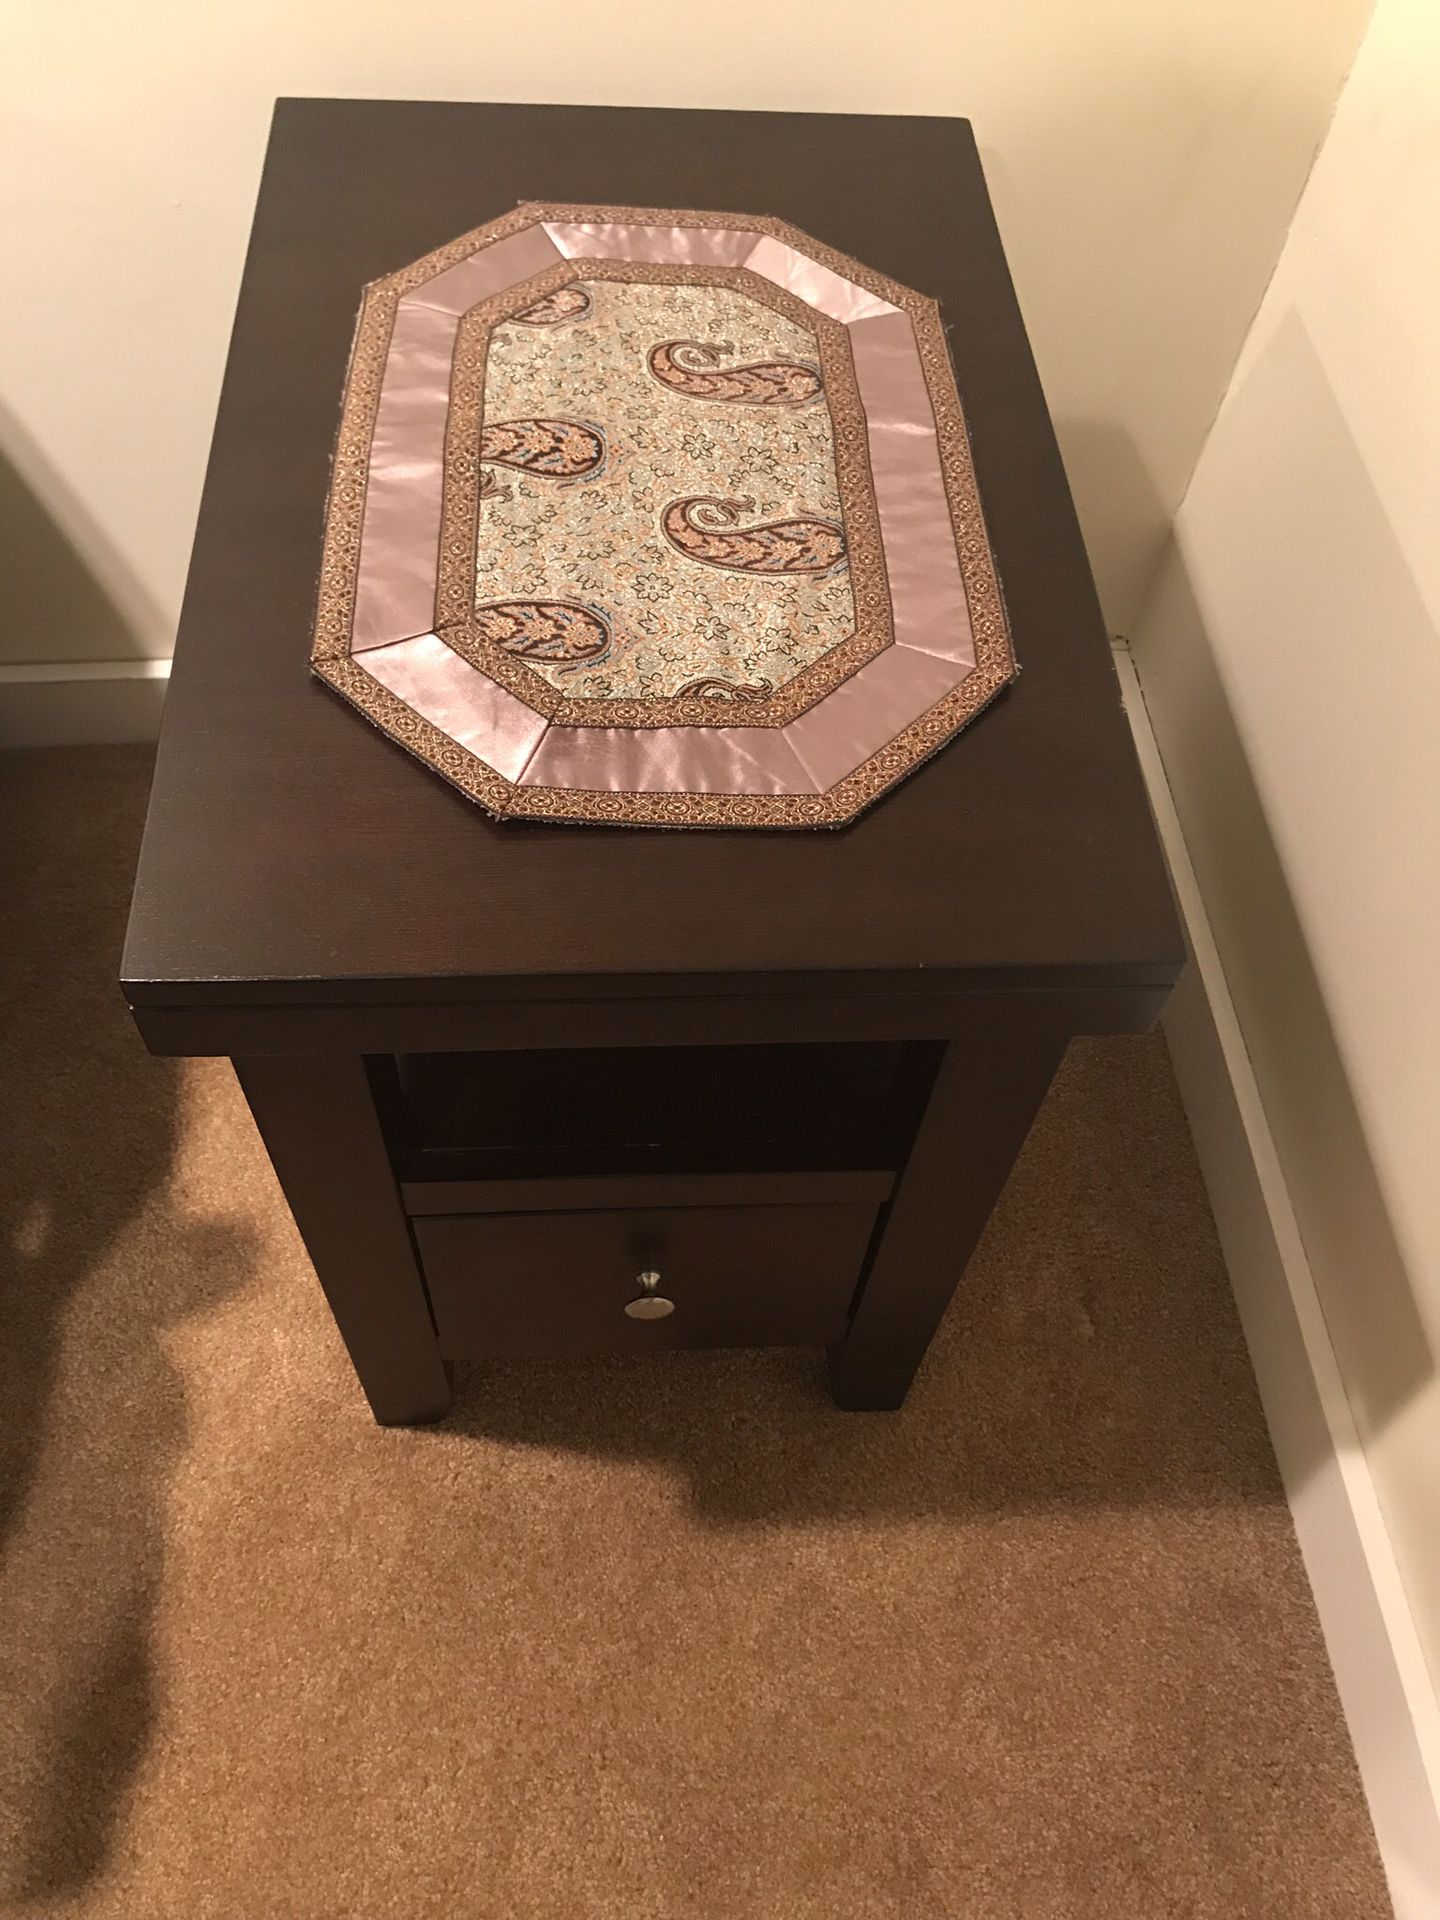 Side Table / Night Stand